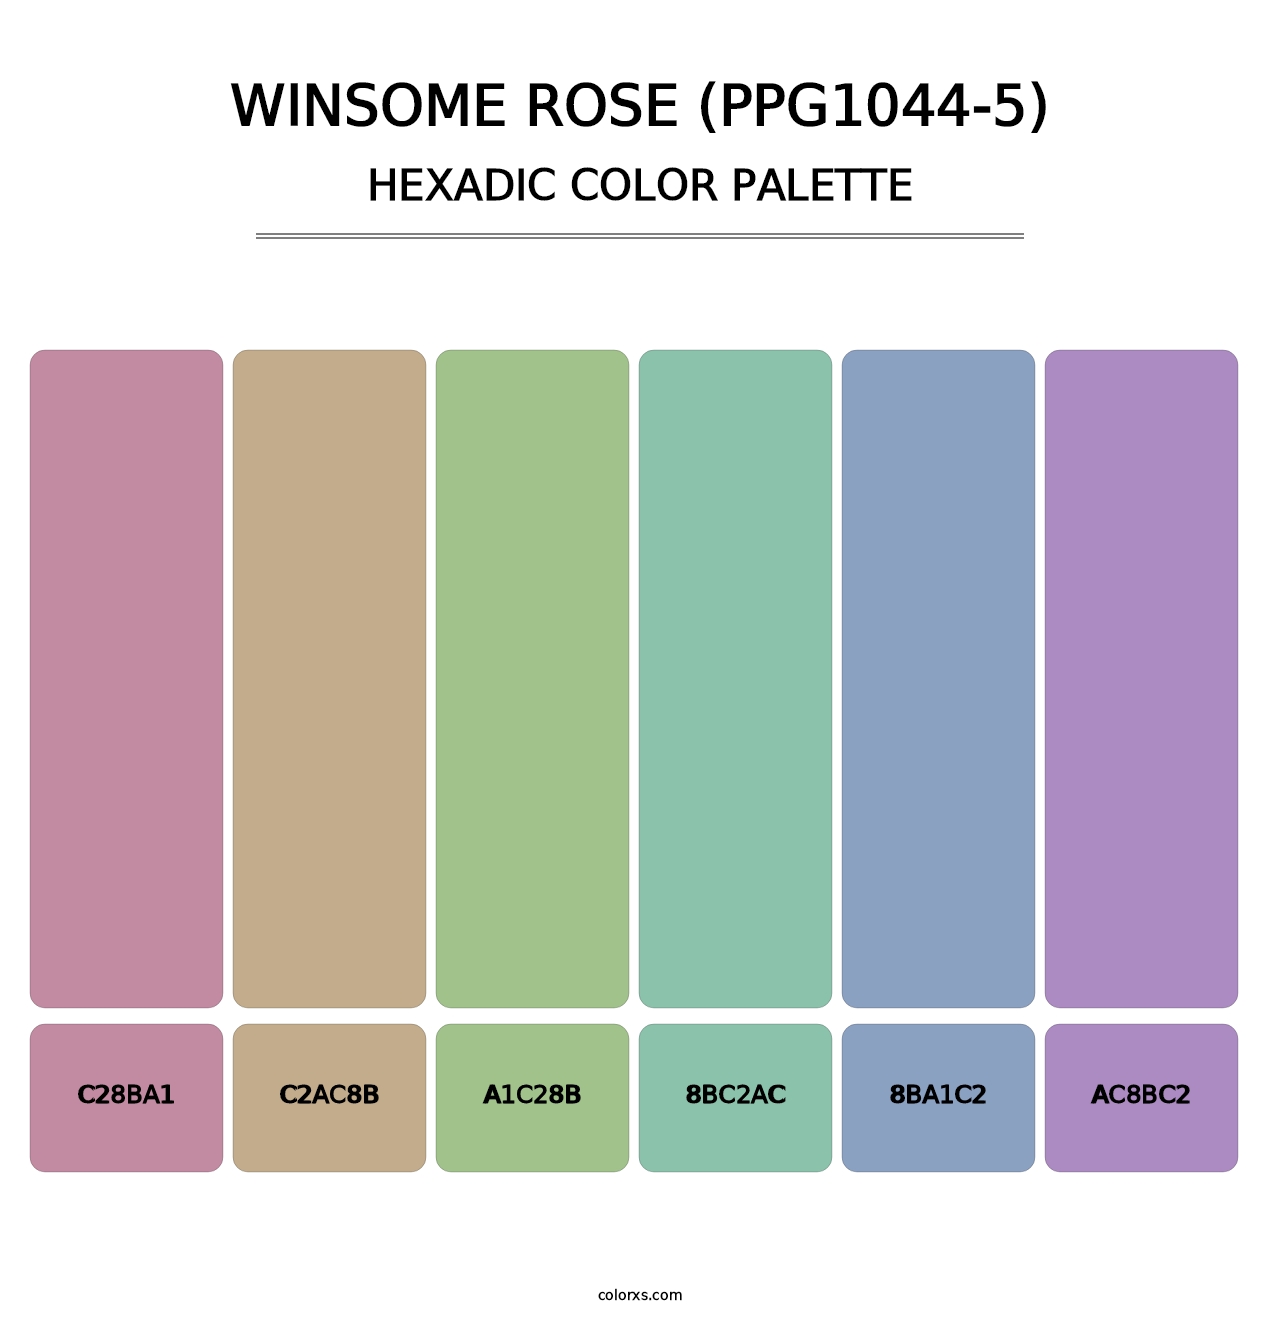 Winsome Rose (PPG1044-5) - Hexadic Color Palette